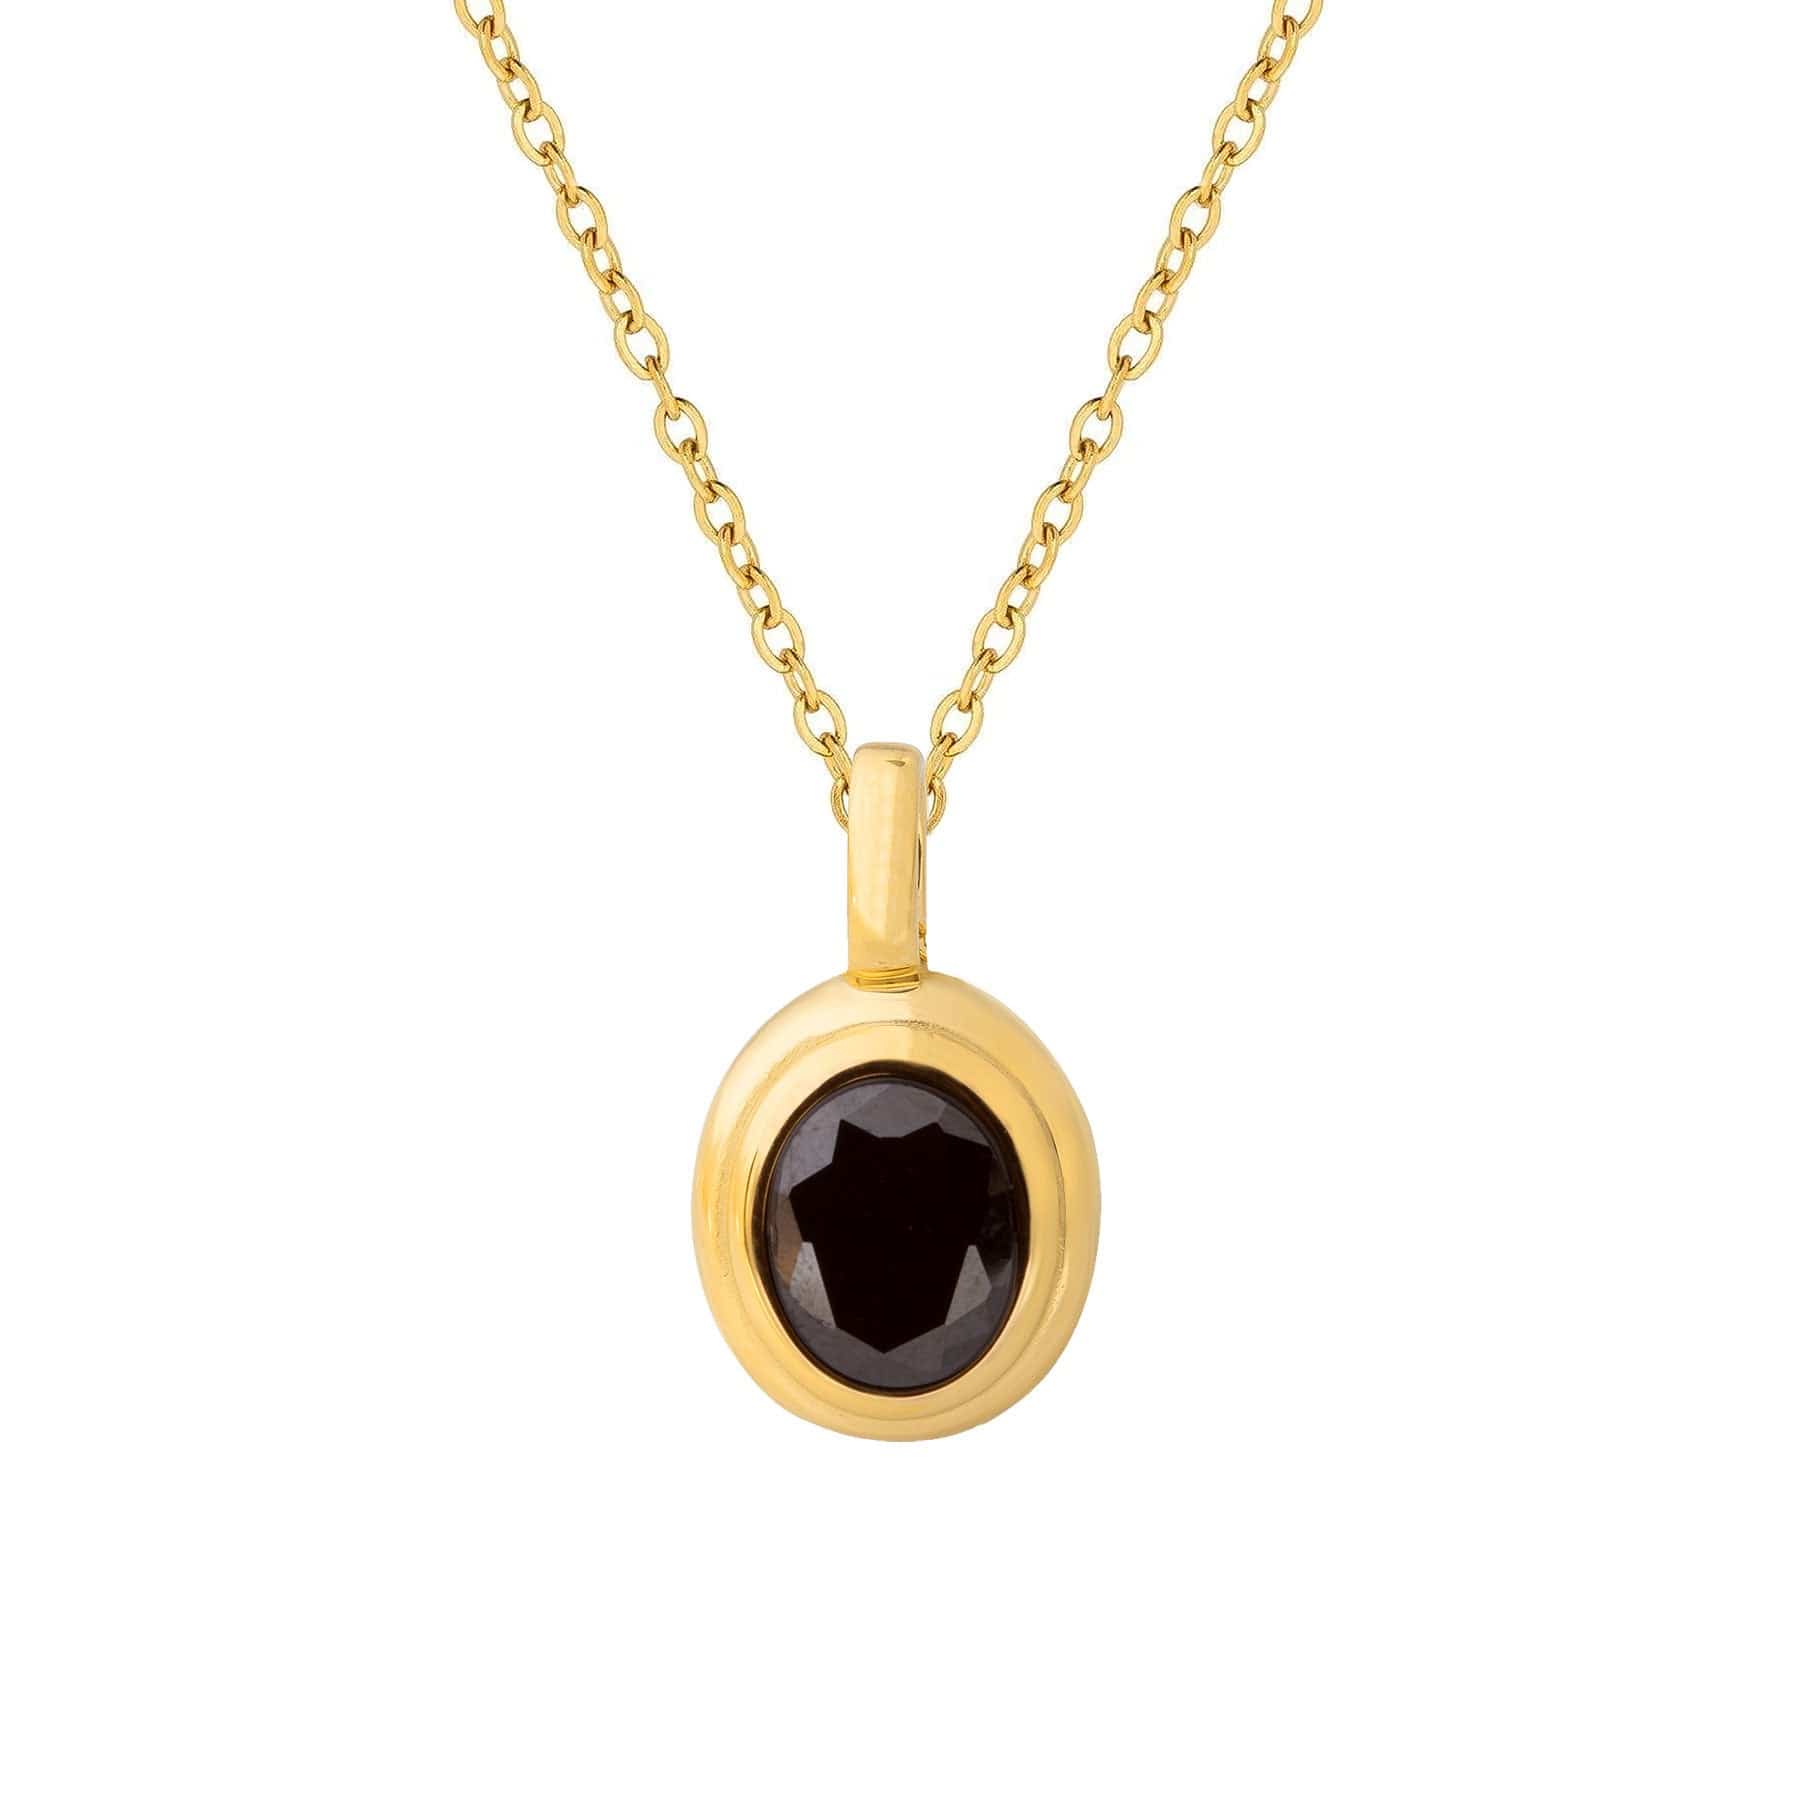 BohoMoon Stainless Steel Sawyer Necklace Gold / Black